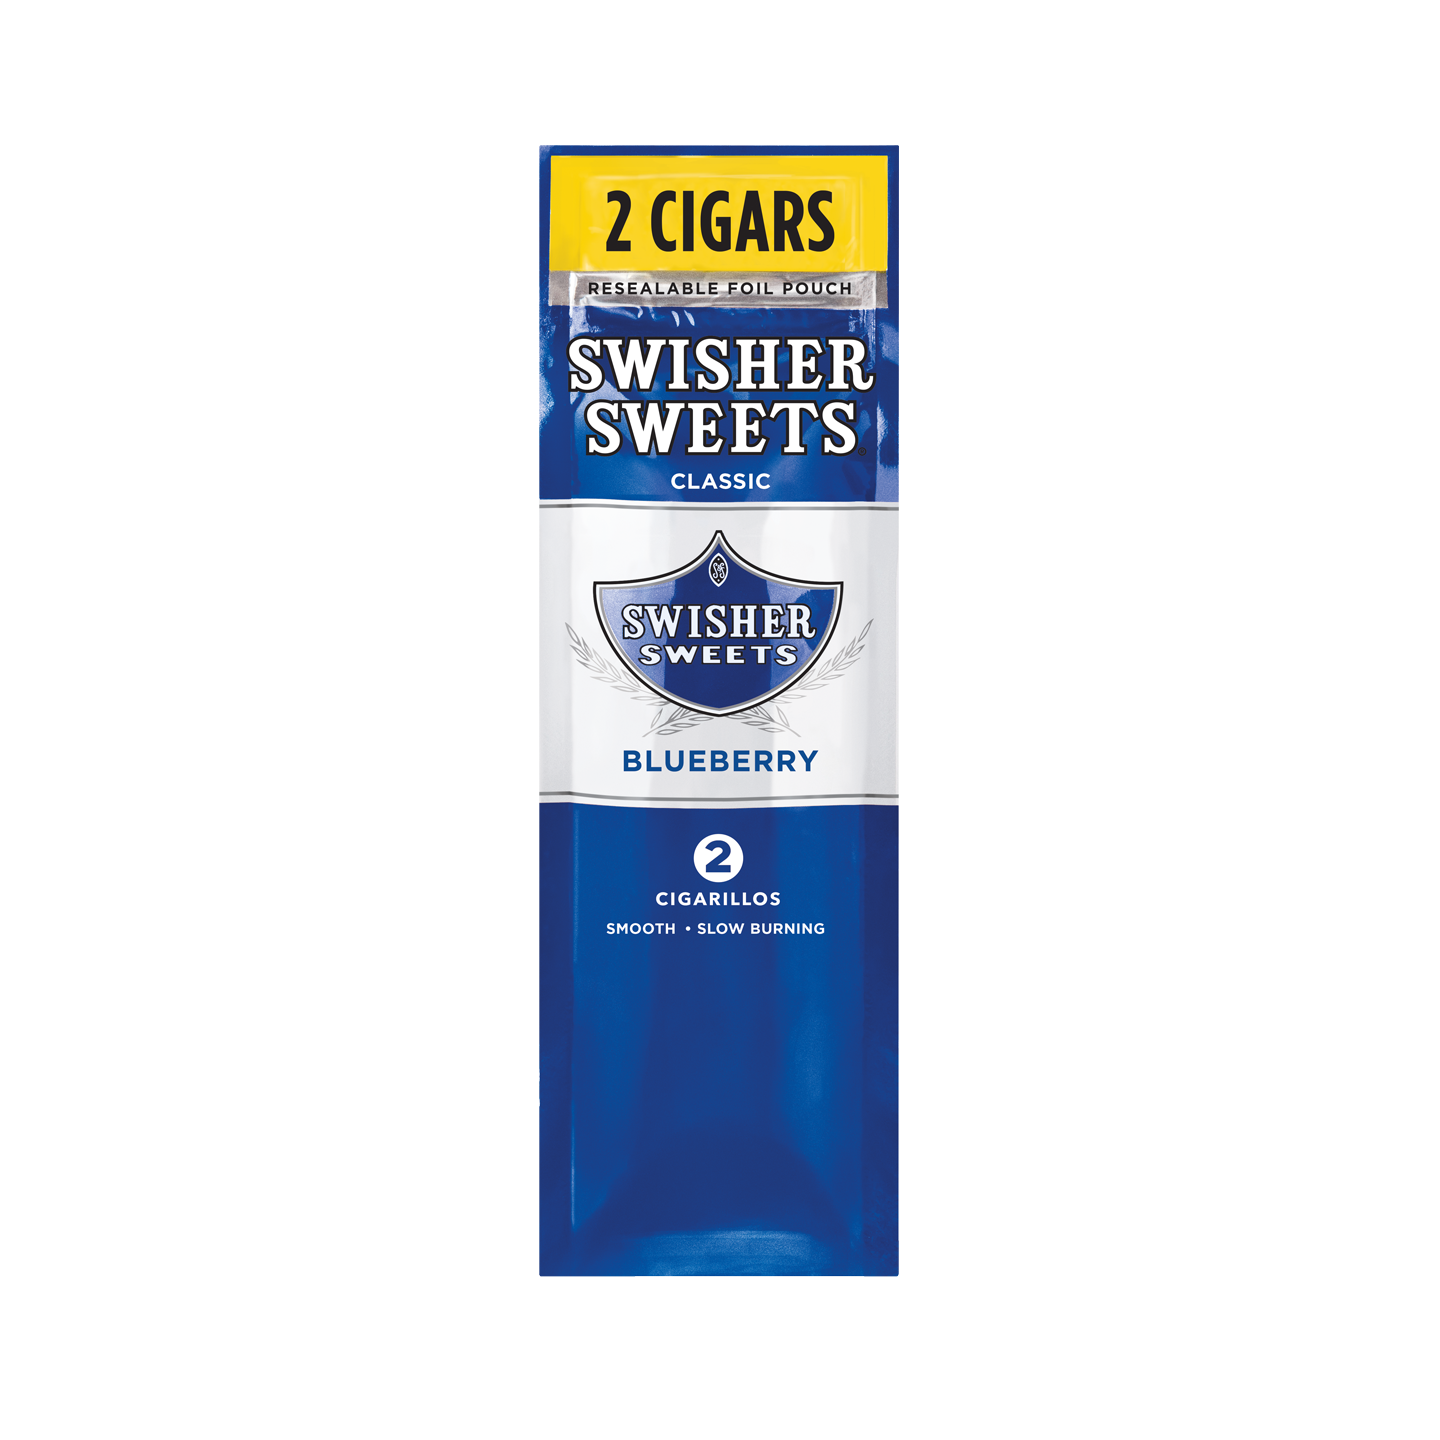 SWISHER SWEETS - Blueberry